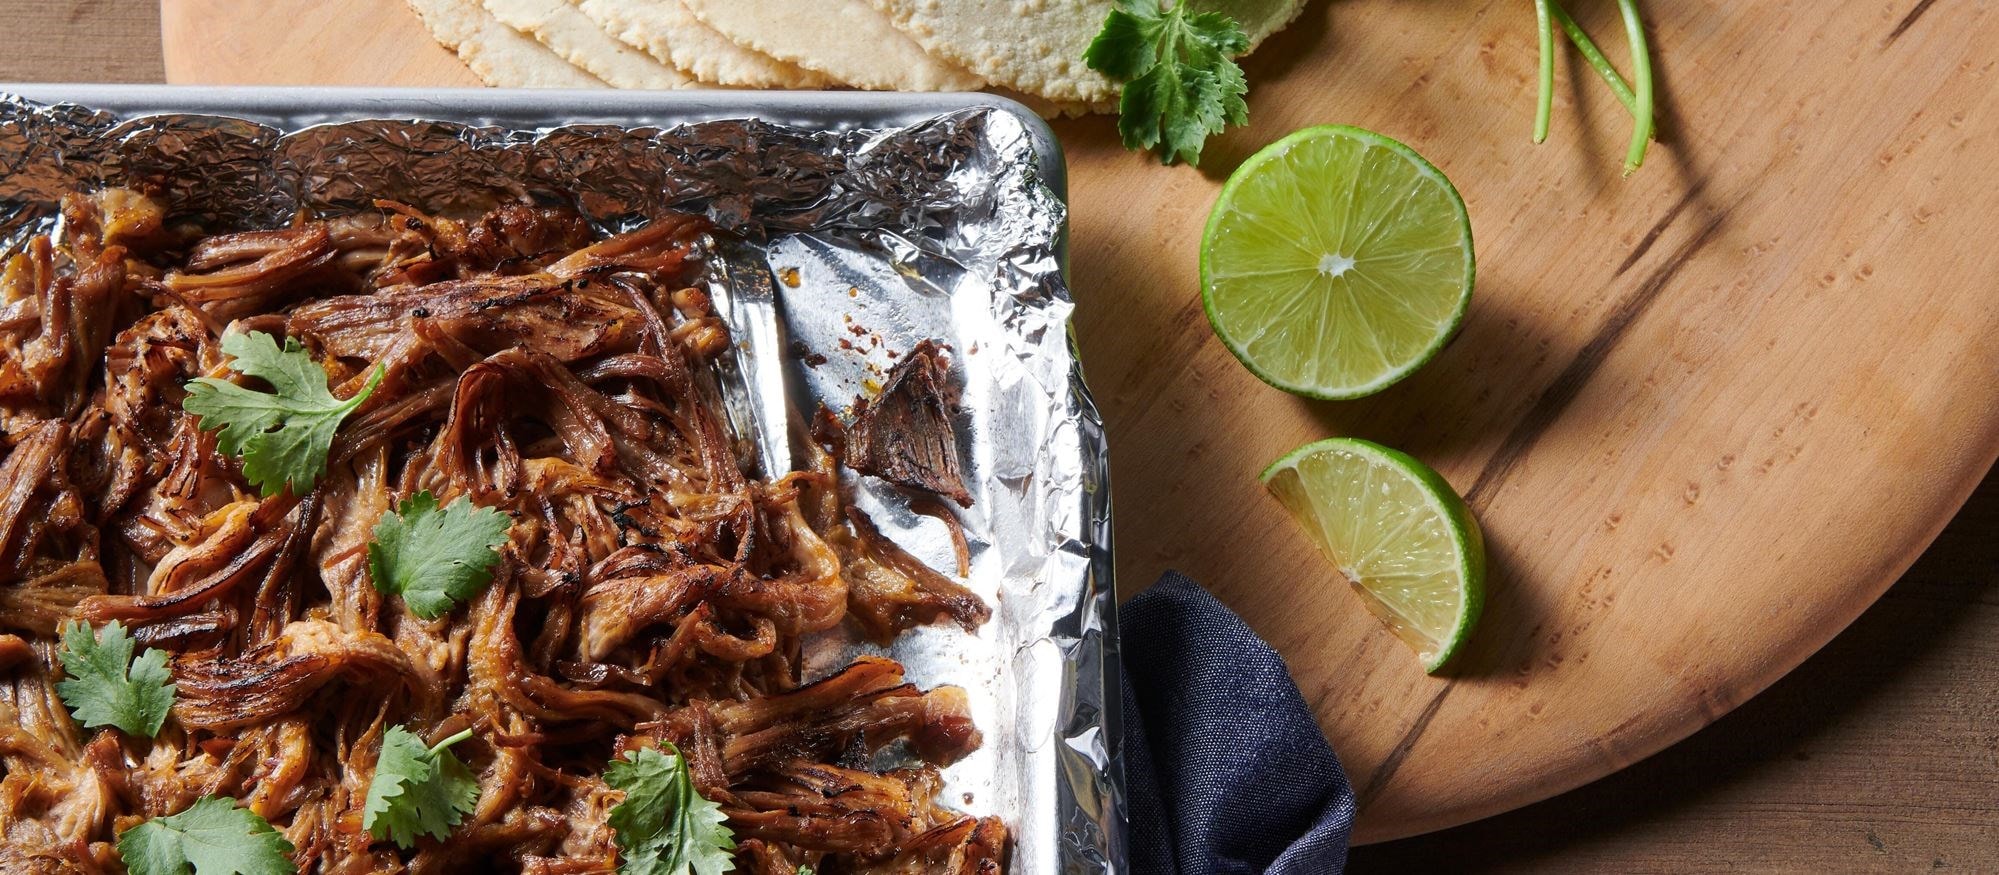 Easy and delicious Carnitas recipe using the Roast Mode setting of your Wolf Oven